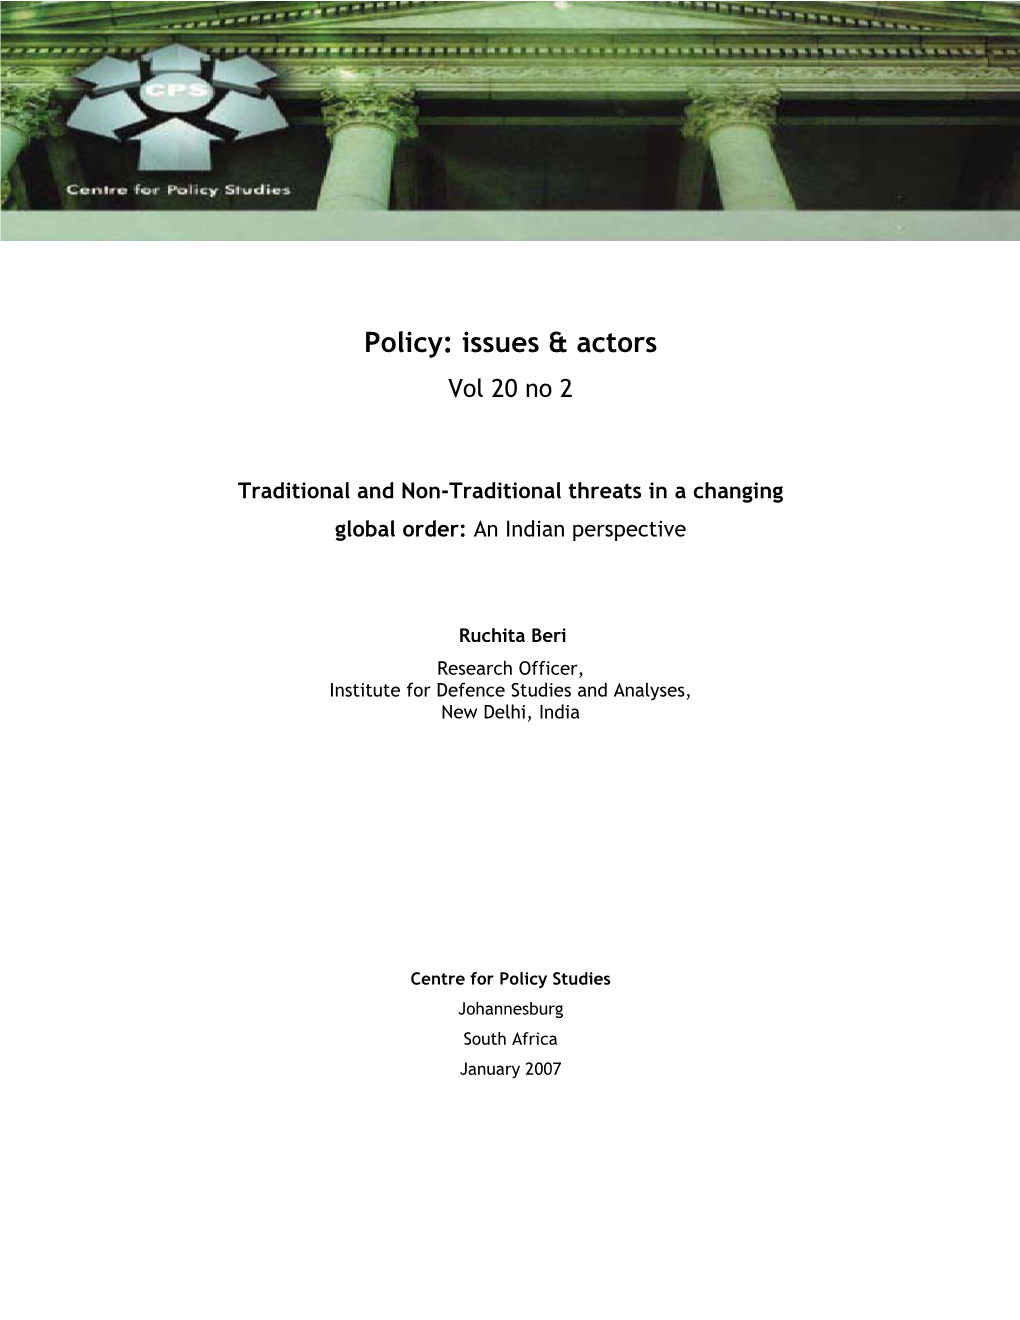 Policy: Issues & Actors